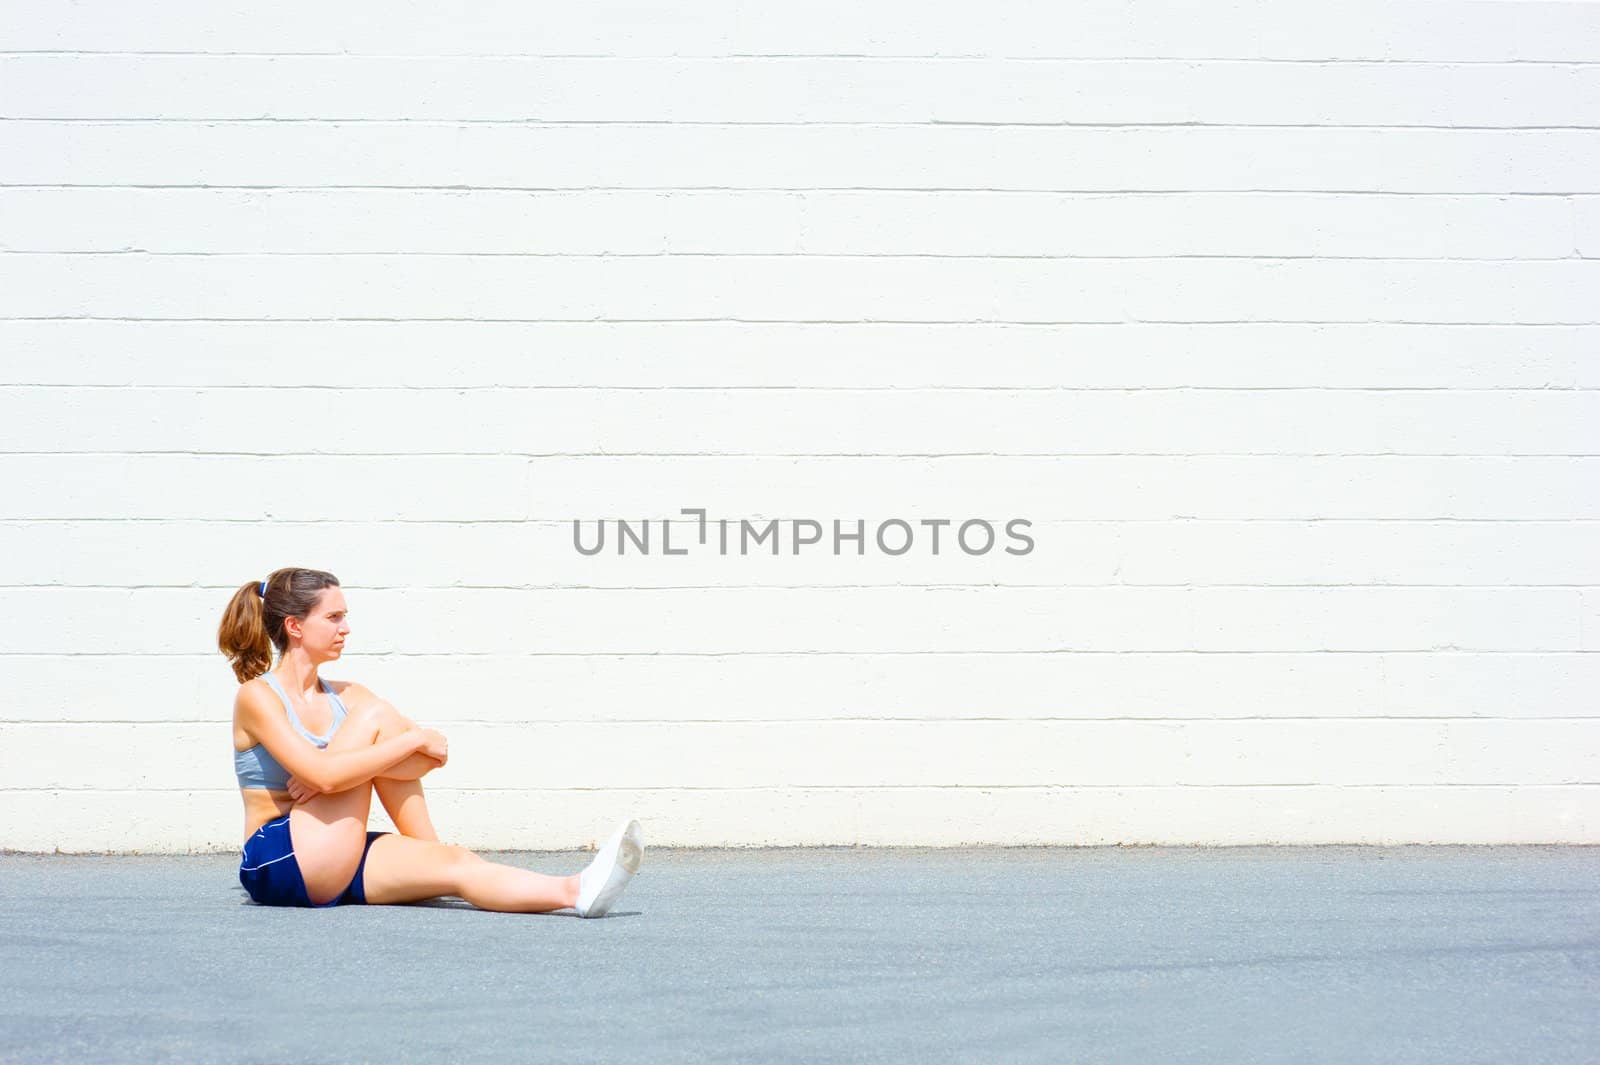 Mature woman working out in an urban setting, from a complete set of photos.